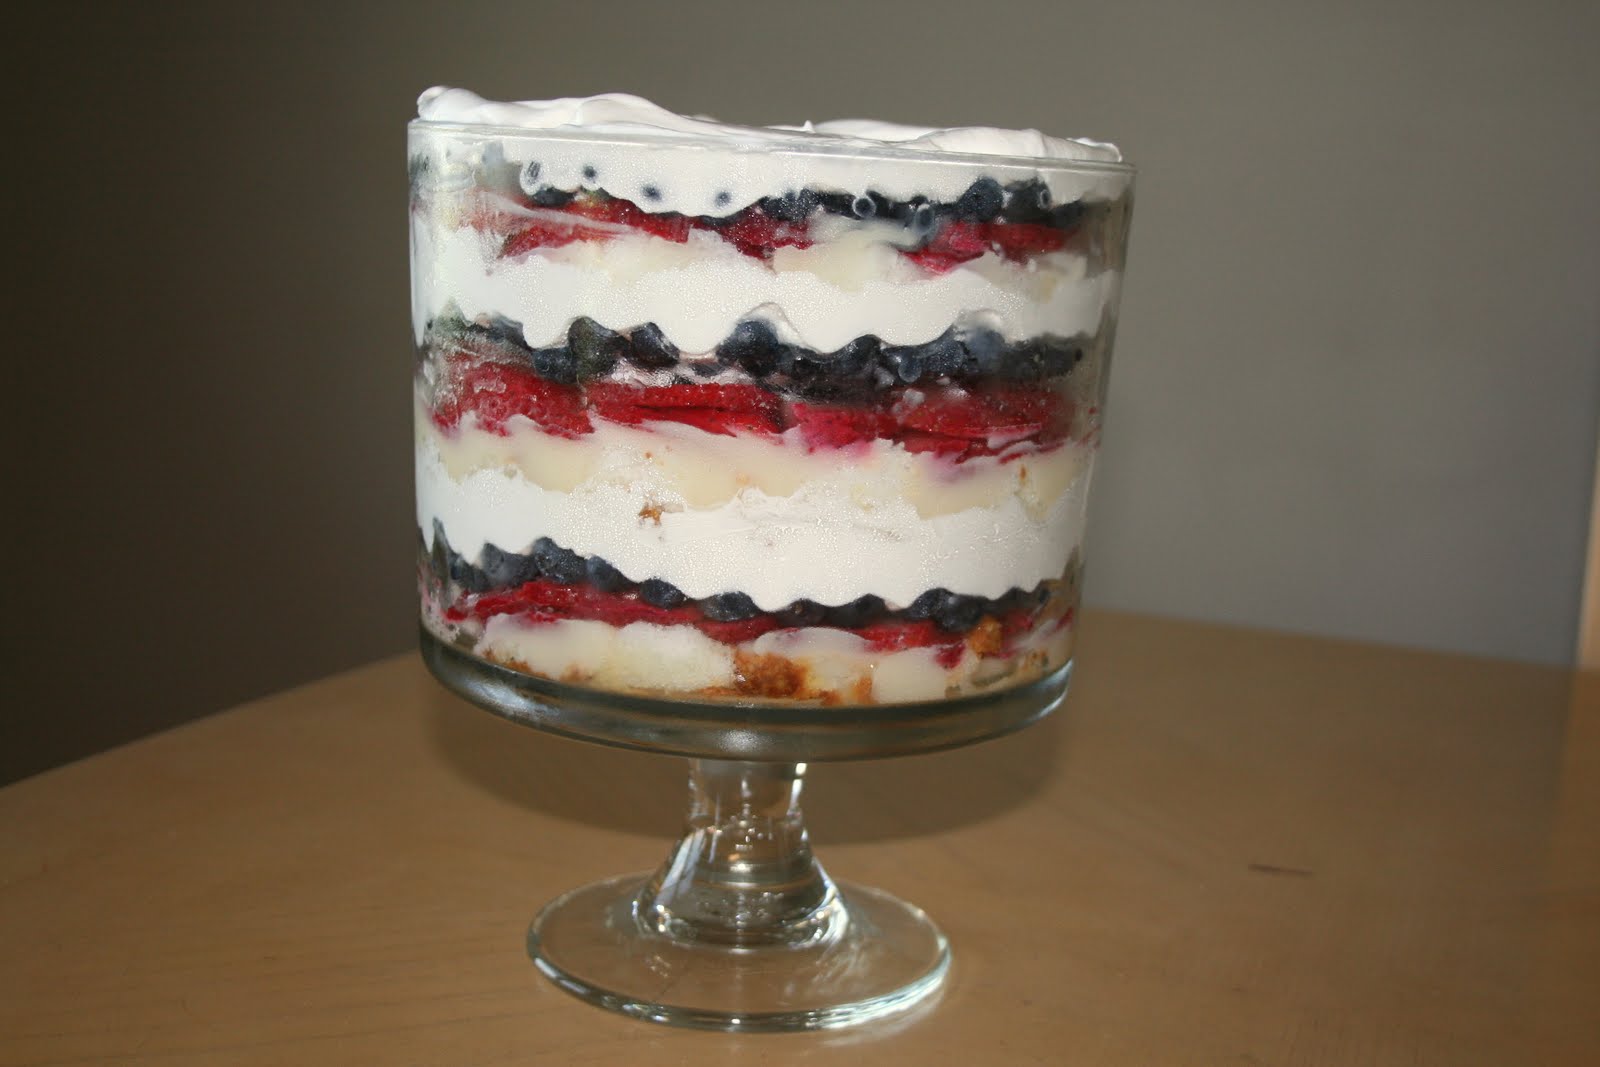 chocolate cupcakes white frosting also made a trifle. It is layers of angel food cake, white chocolate 